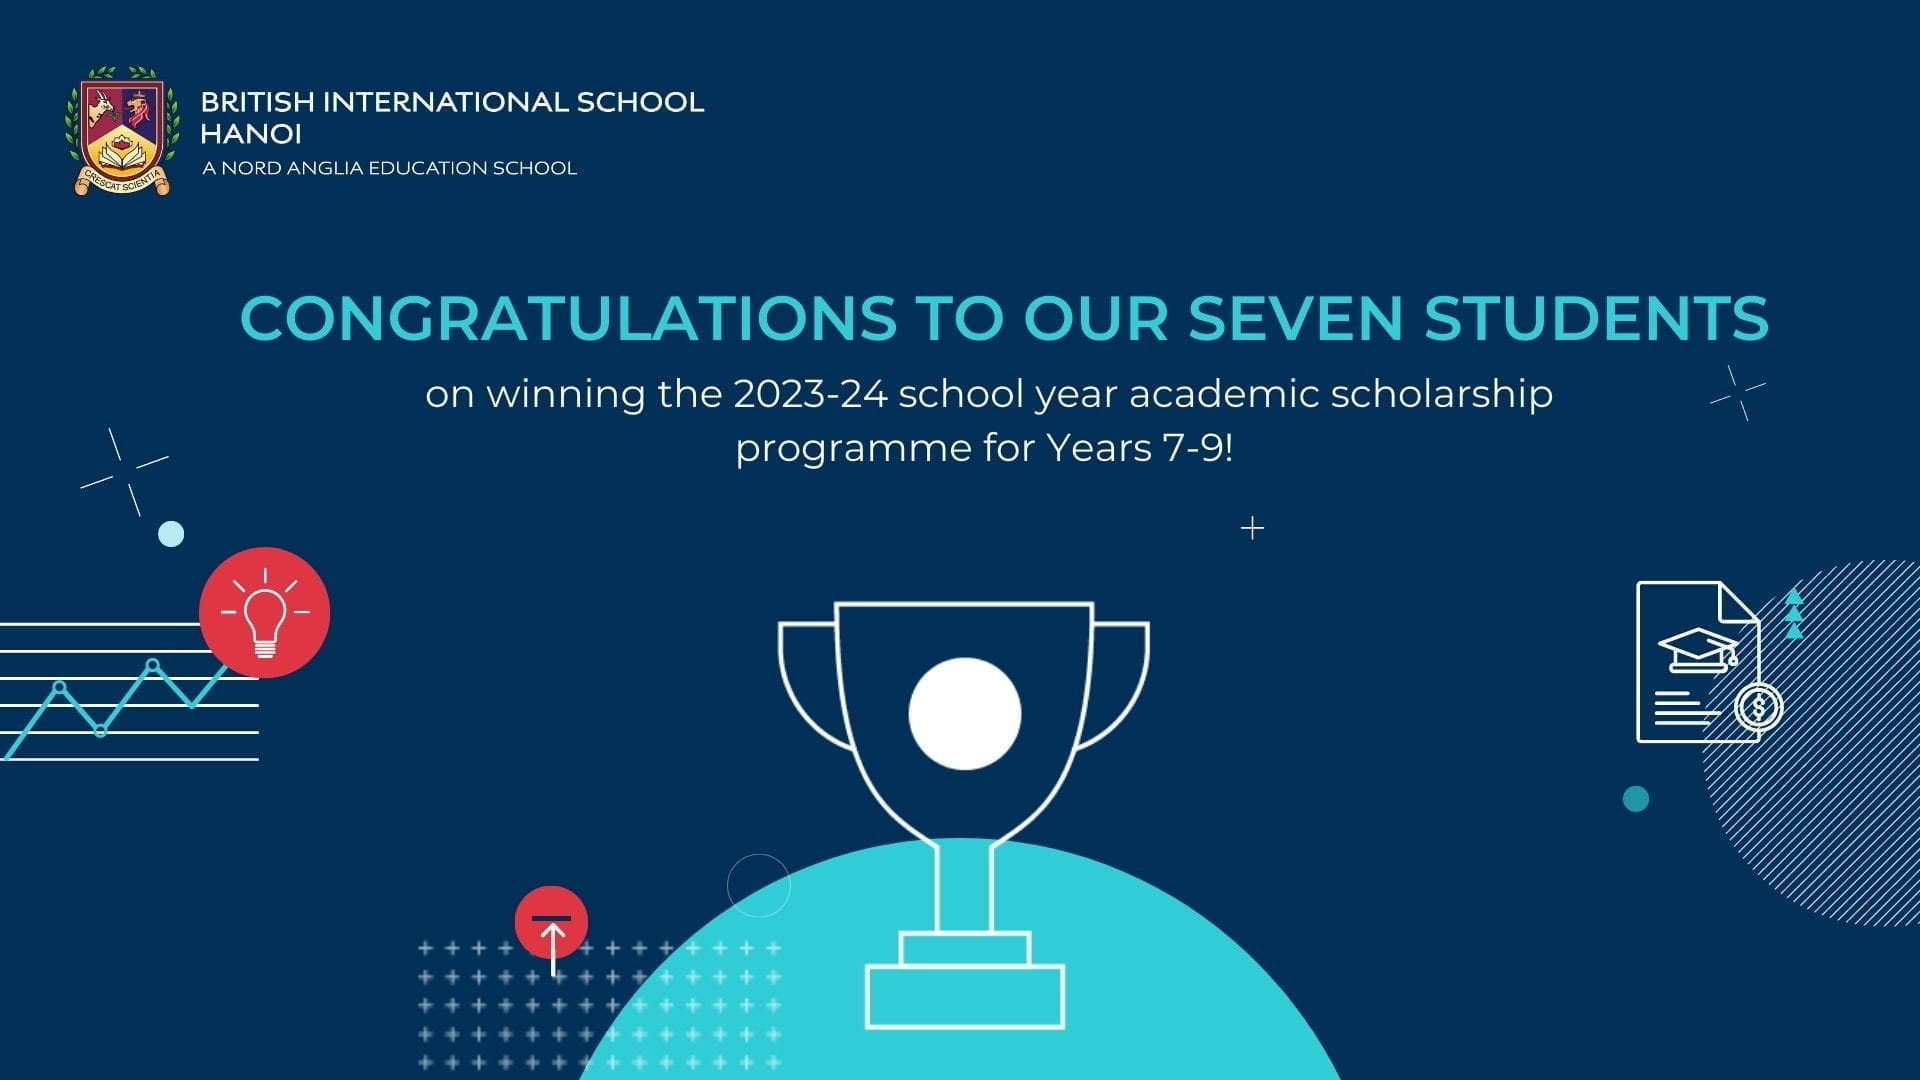 The 2023-24 academic scholarship programme for Years 7 to 9 results announcement | British International School Hanoi - Winners of the 2023-24 school year academic scholarship programme for Years 7 to 9